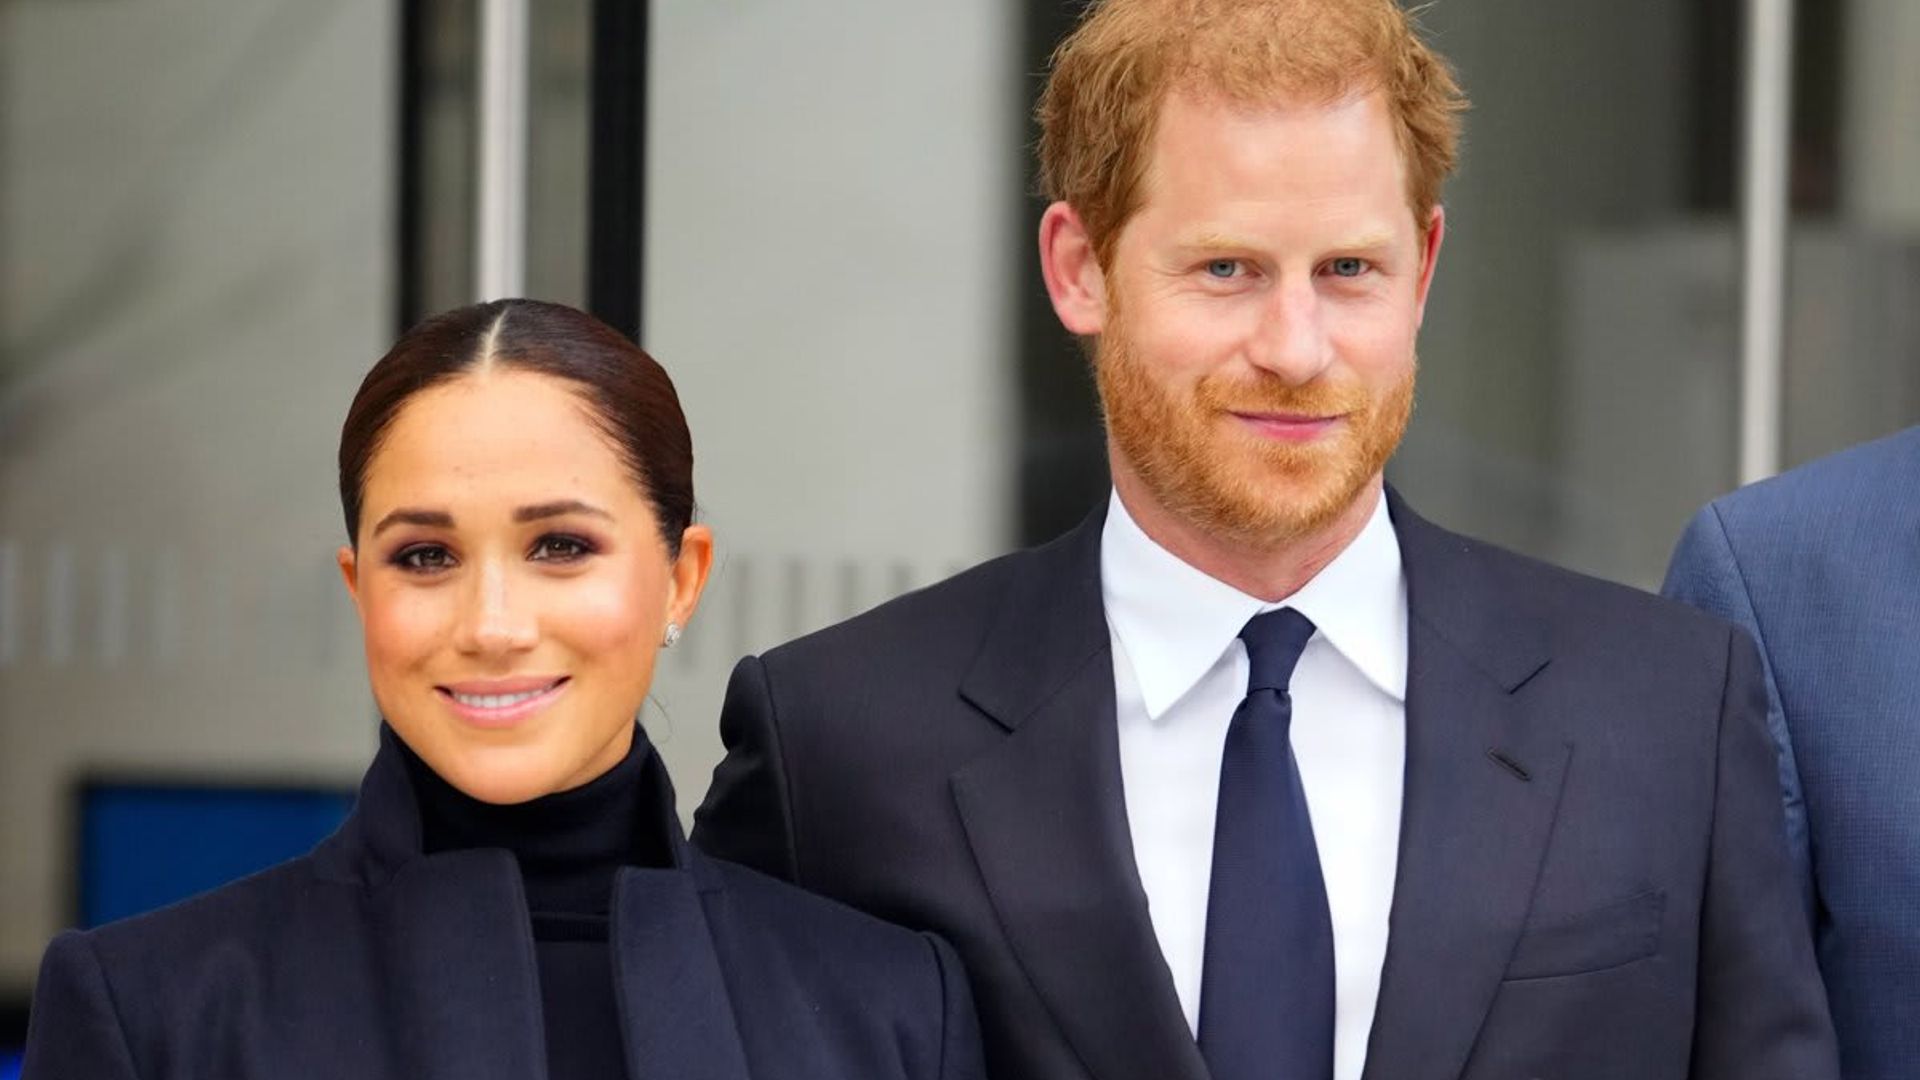 Find out what Meghan Markle and Prince Harry’s company has pledged to do by 2030